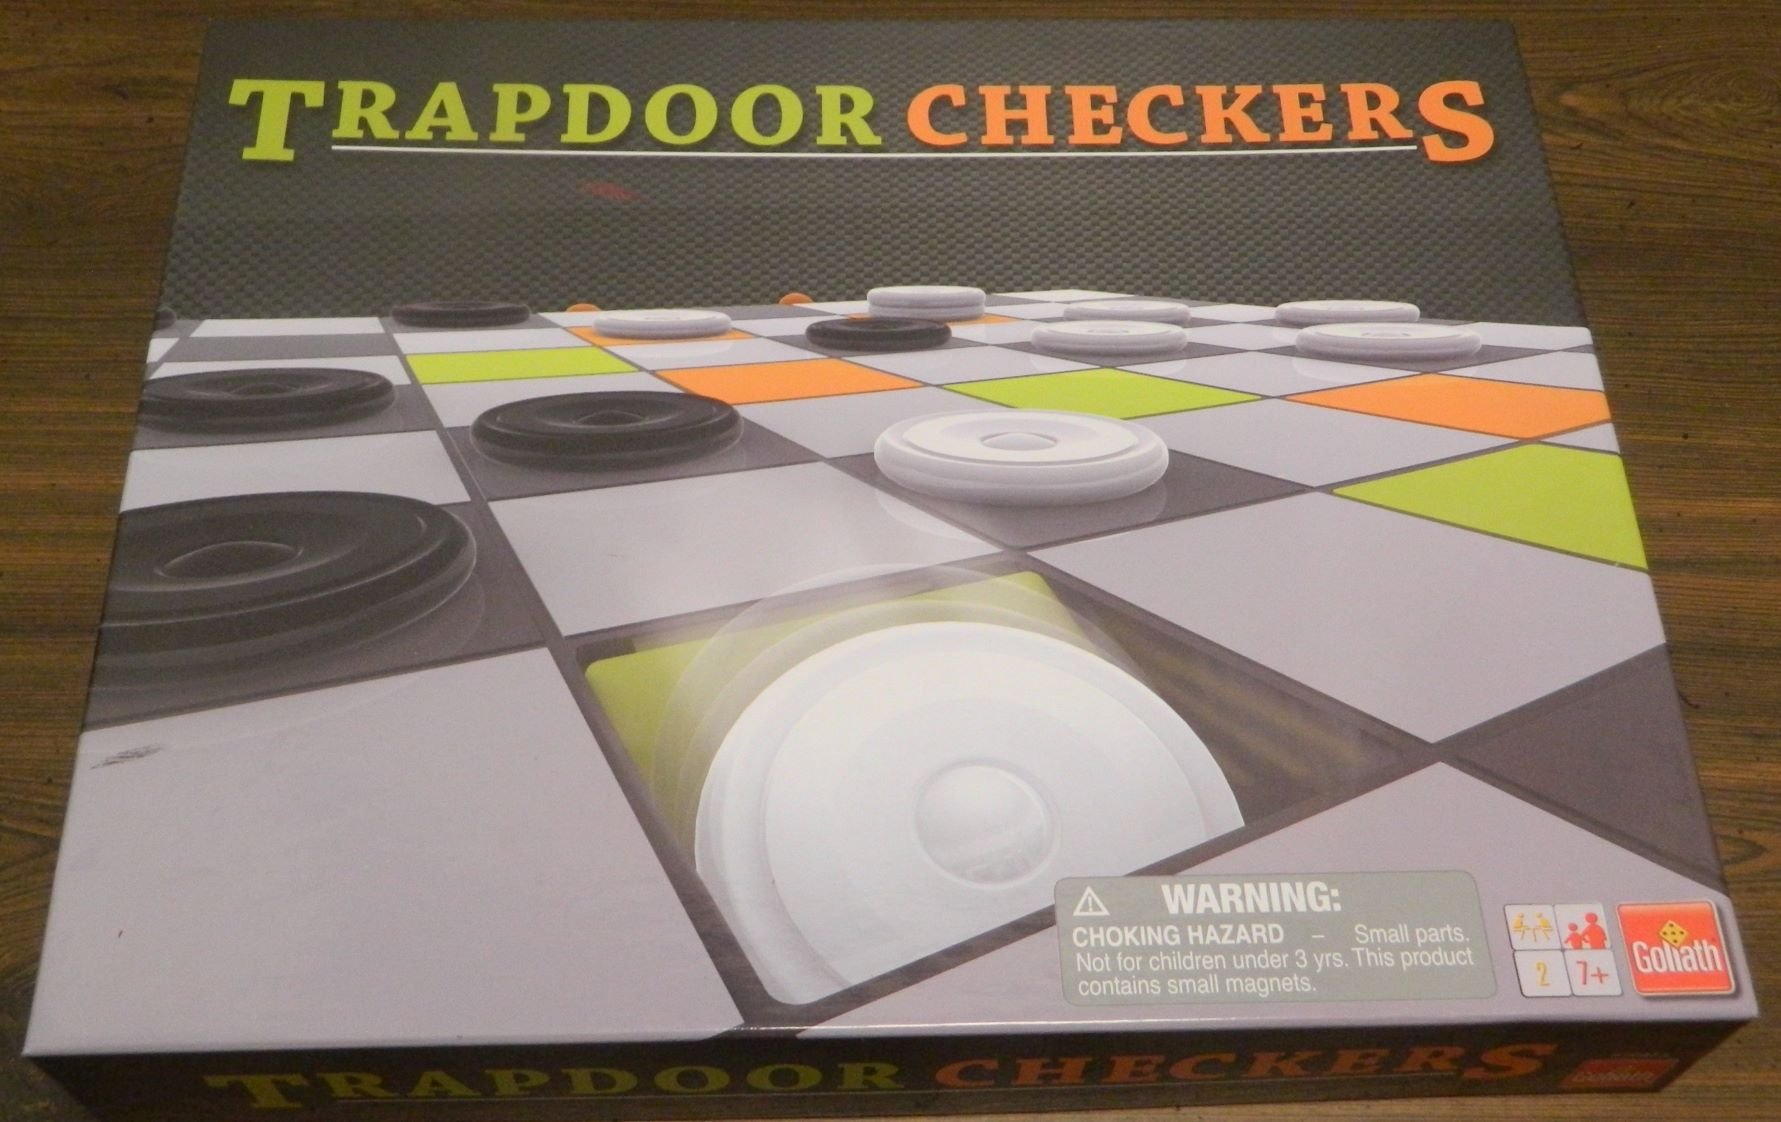 Trap in the opening! Win a piece in checkers! #warcaby #checkers #drau